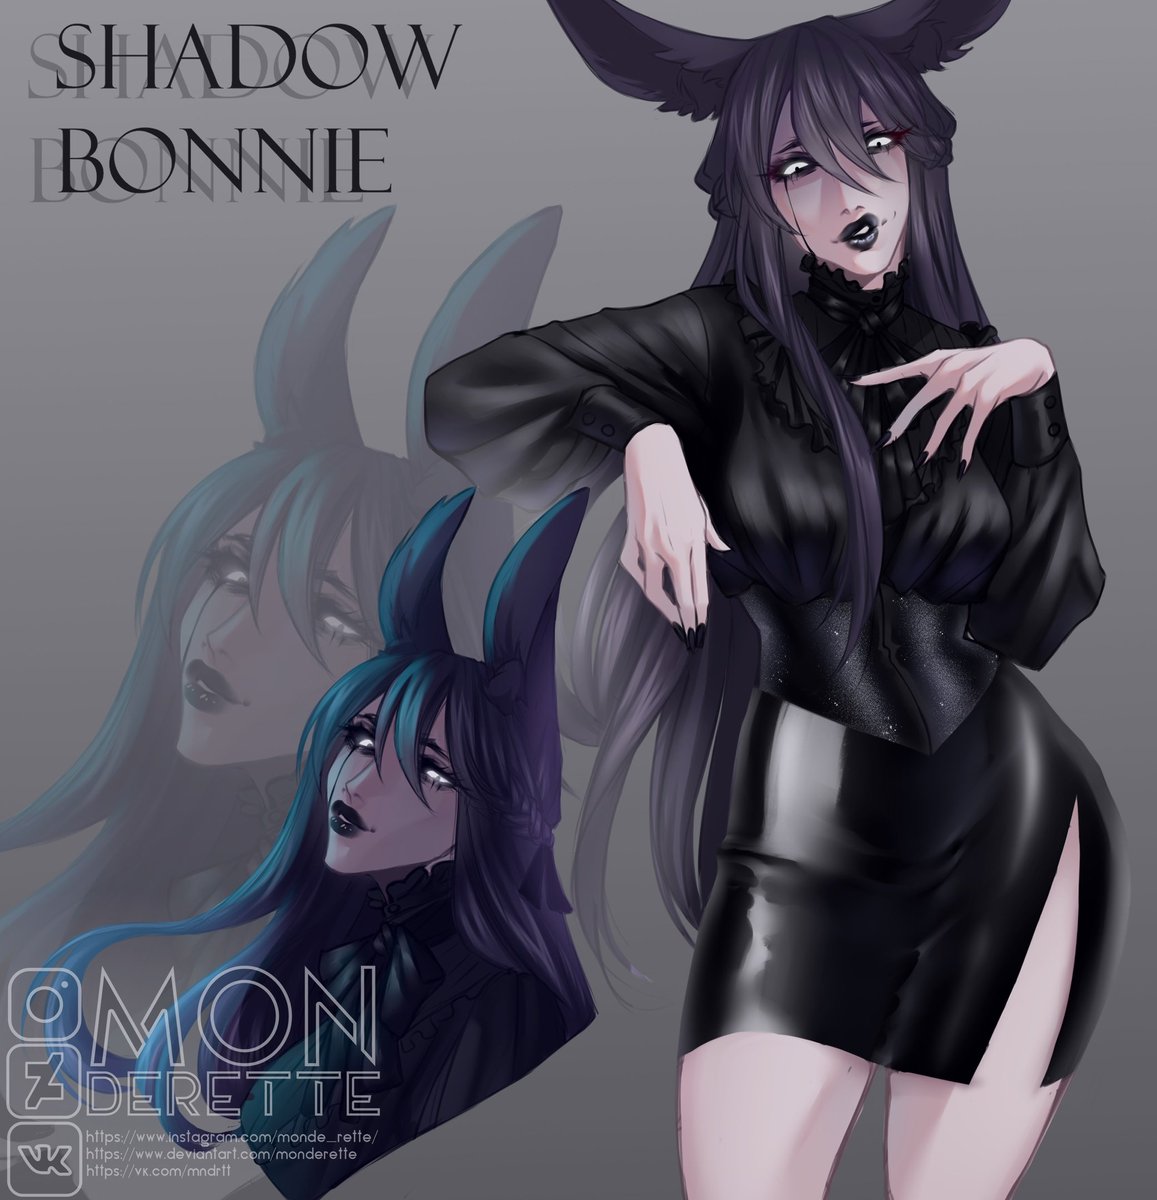 Hello there! My name is Ada, but you can call me Monderette. I'm here to show you my artworks, i'll try to post them everyday! Raffle on 500 followers~ Here is my Shadow Bonnie humanization~ #FNAF #fnaffanart #FNAFMovie